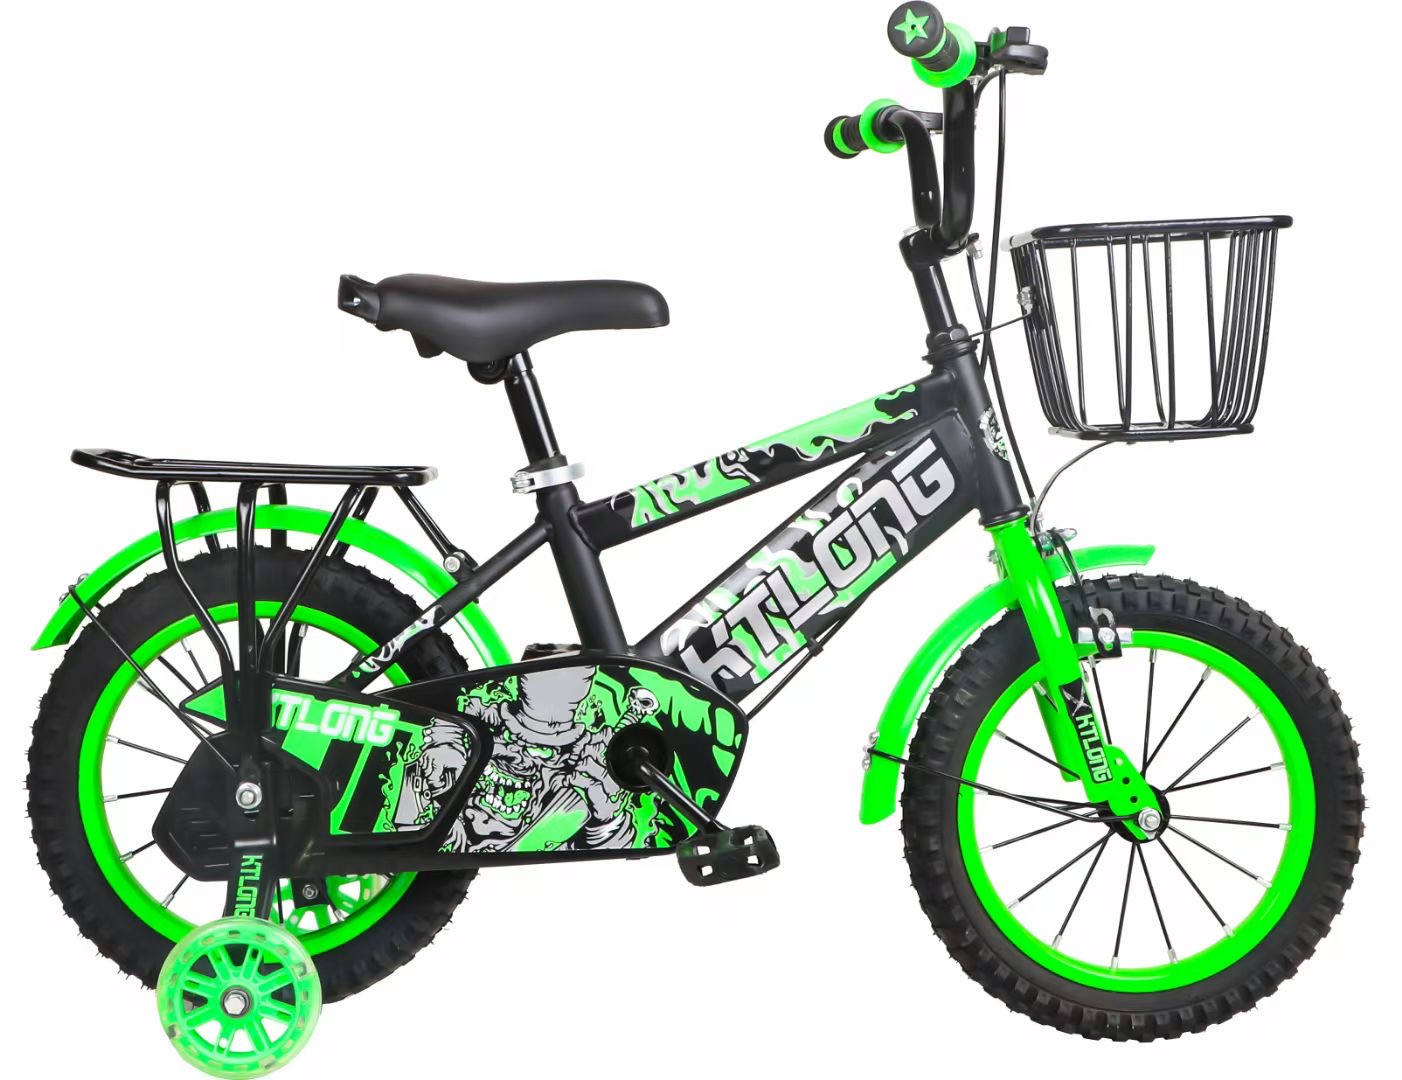 2021 baby cycle for 3 to 5 years old girl bike / 4 wheels kids bicycle for children / hot sale good girls kids cycle for sale